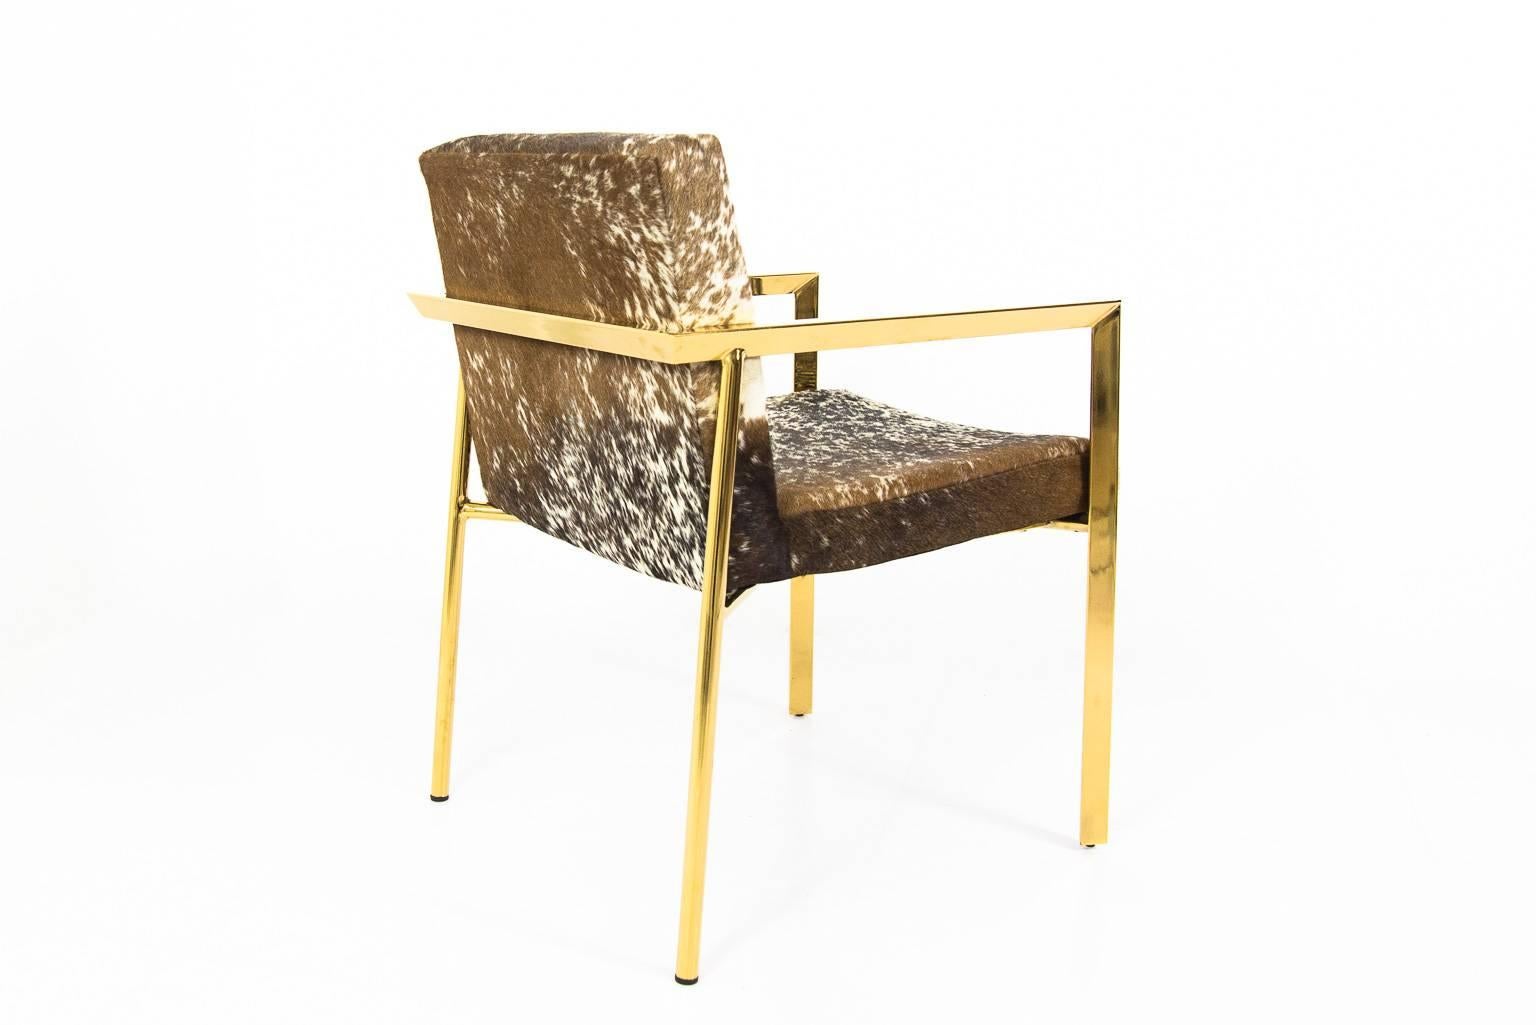 Modshop's Argentina chair is what your home needs. In cowhide upholstery, the brass frame starts off with straight lines in the front and finishes in the back with round legs. Also has slight pitched back
Measures: 21.5